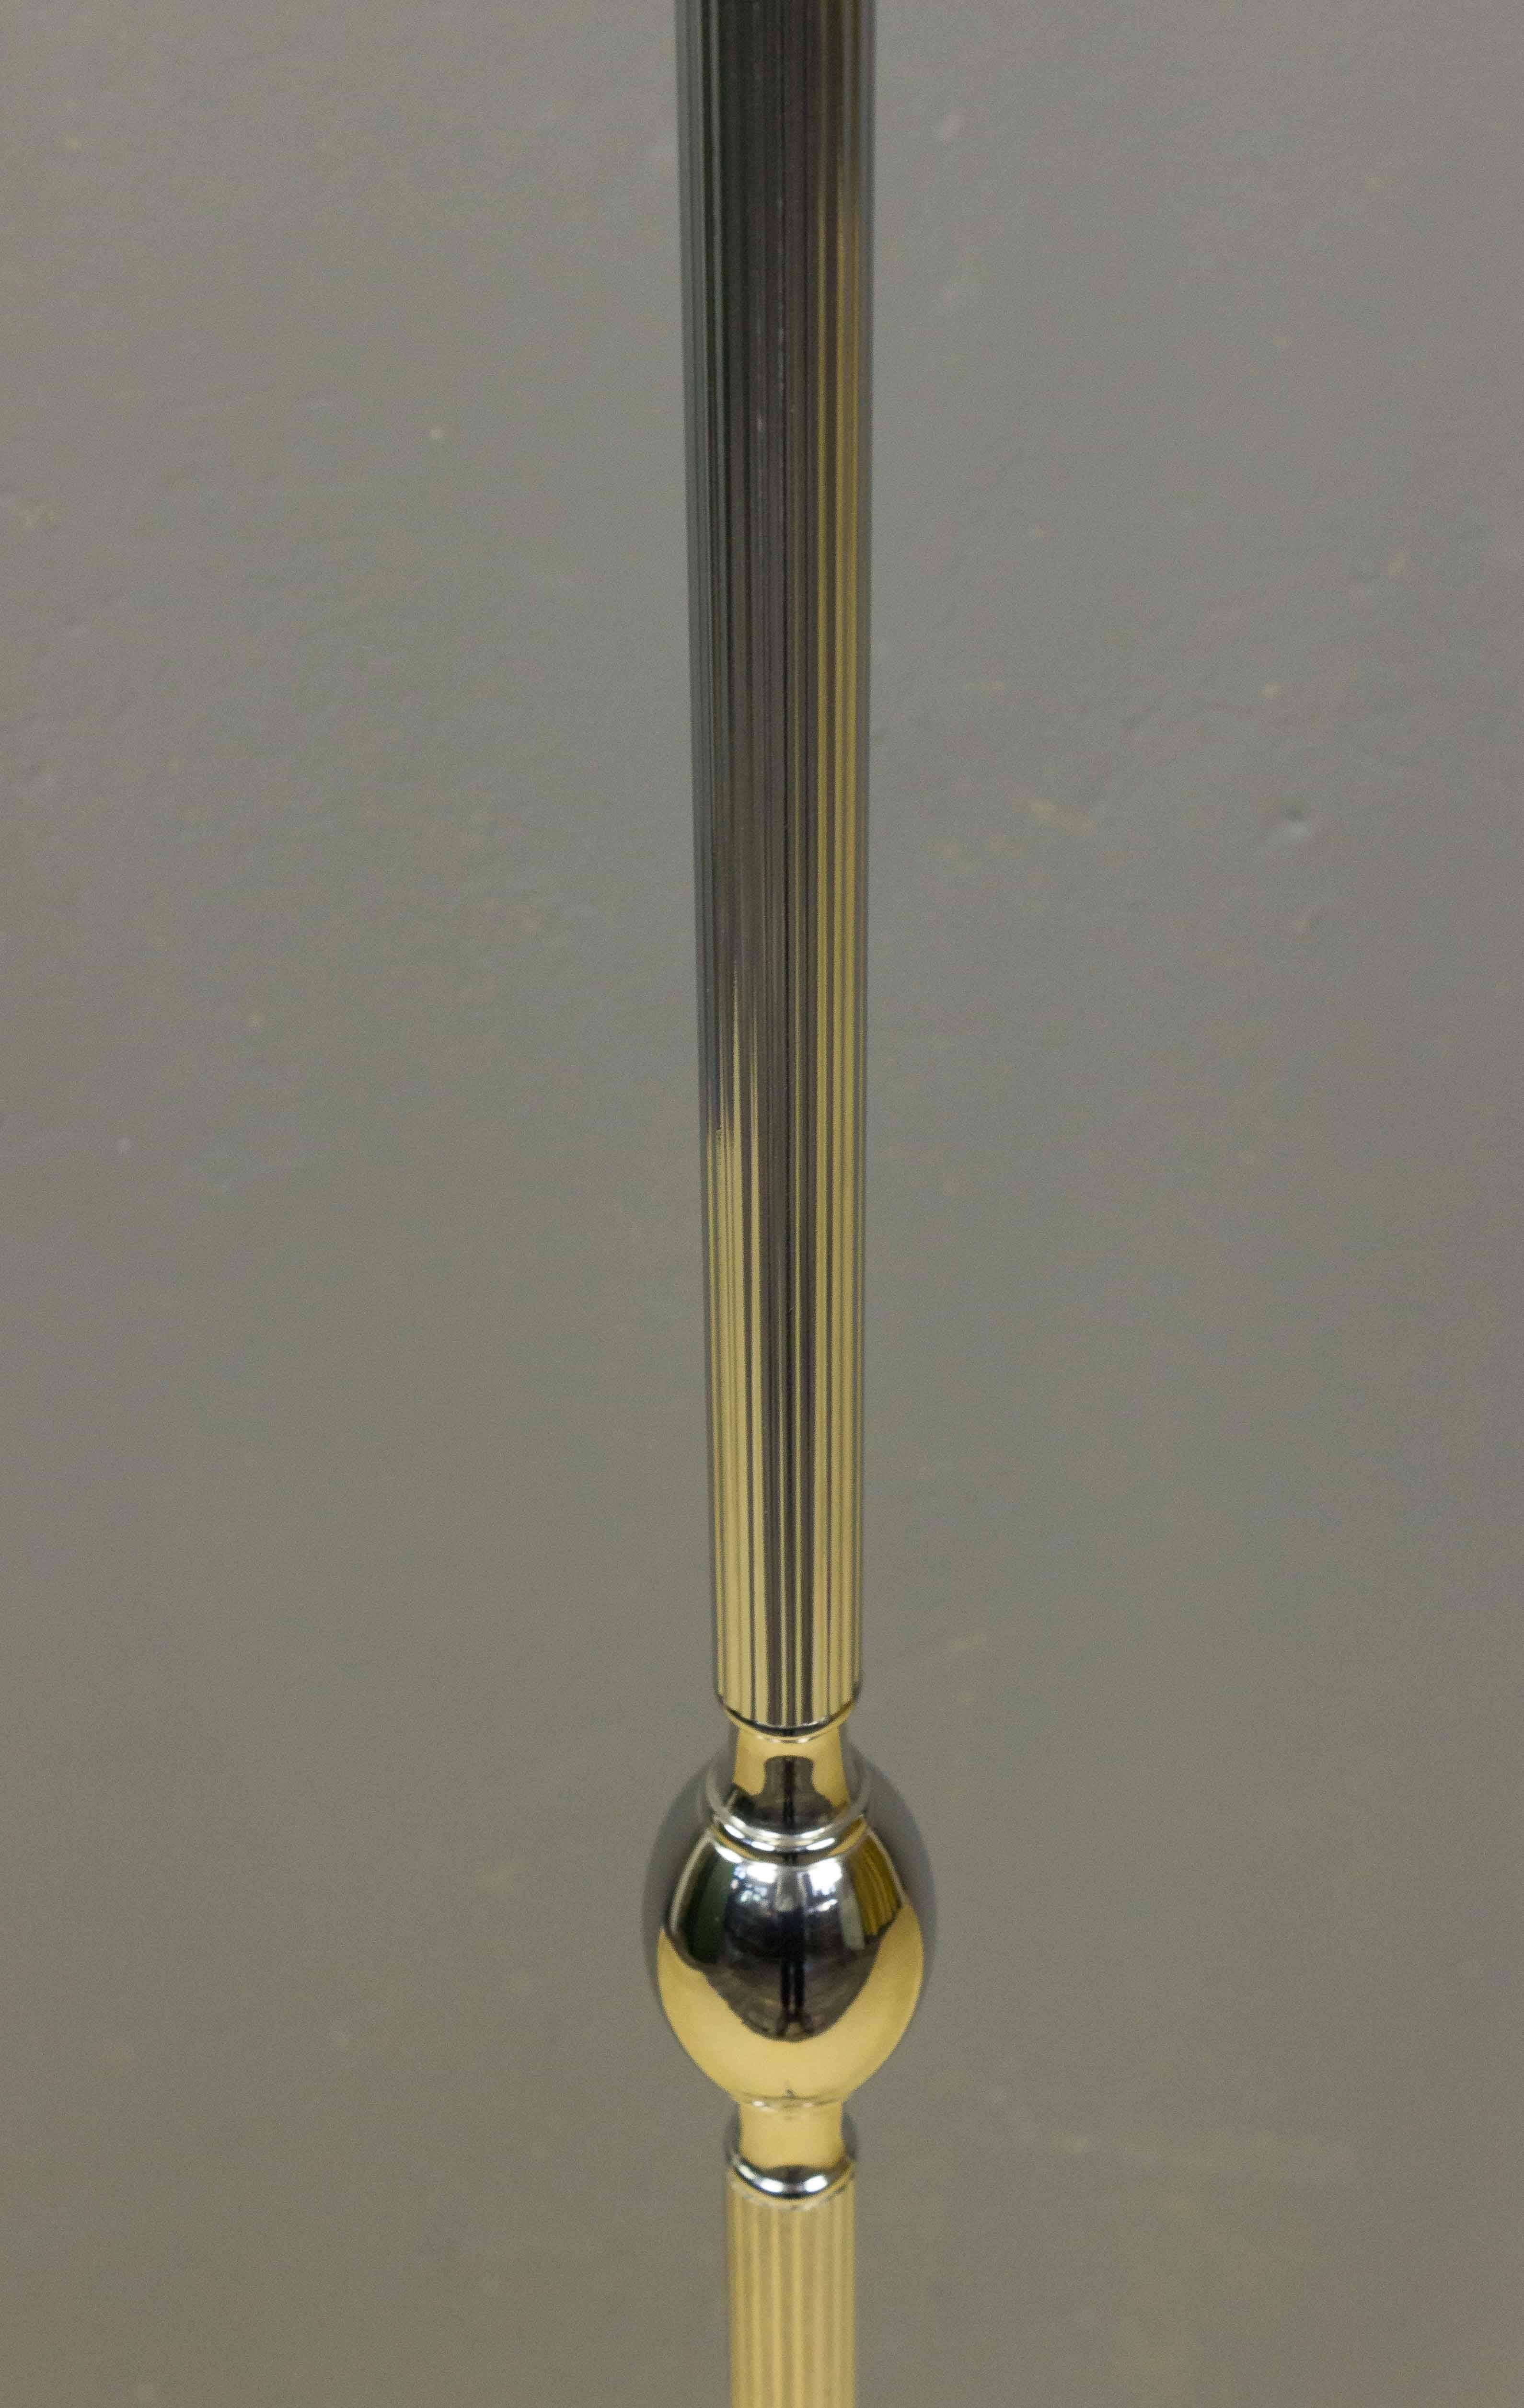 Mid-20th Century 1940s French Nickel-Plated Floor Lamp with a Tripod Base